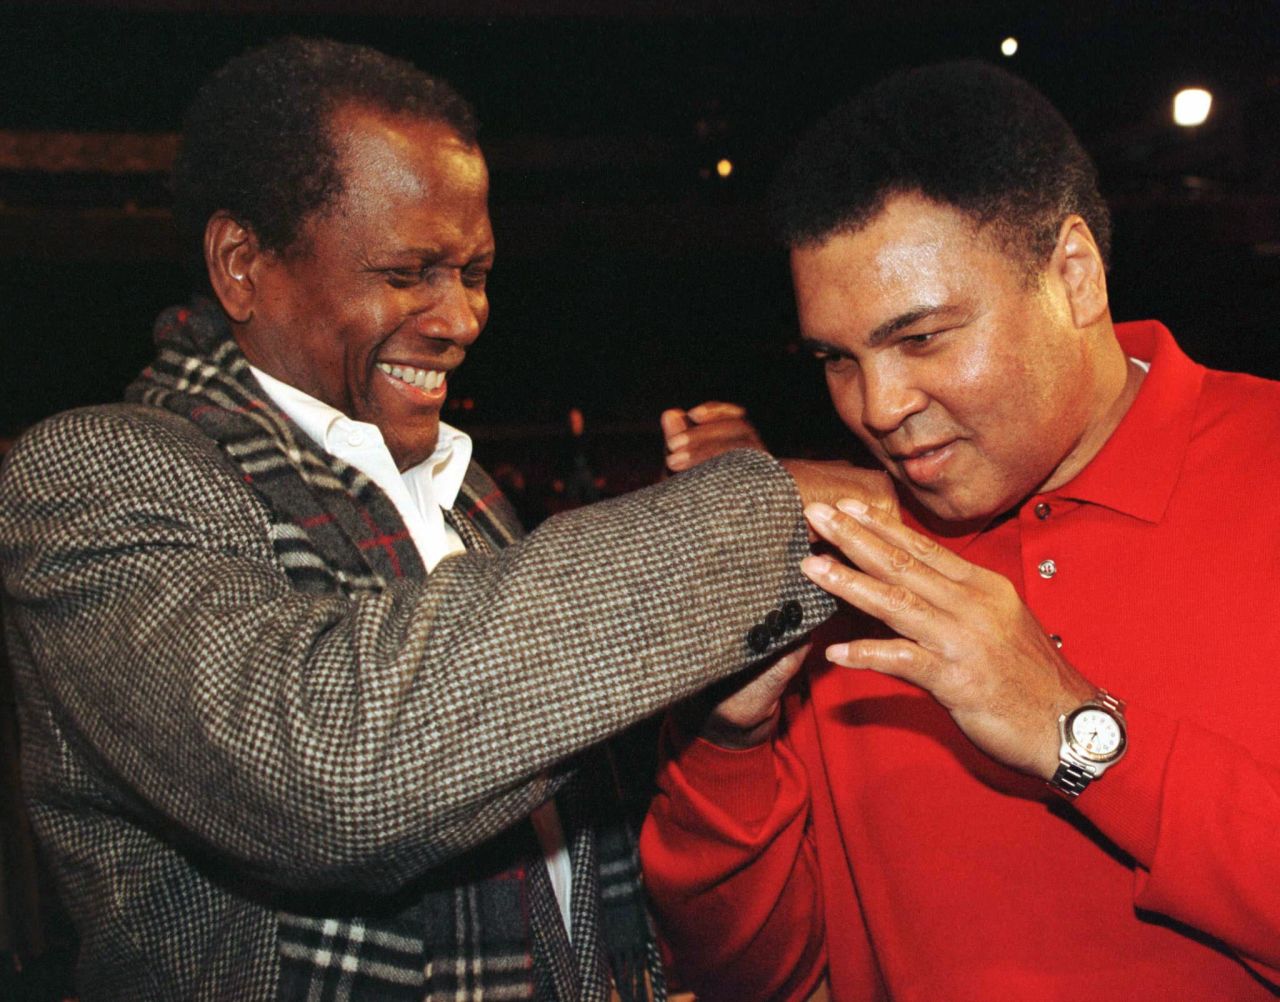 Poitier plays around with boxing legend Muhammad Ali at an ESPY Awards rehearsal in 1997. Poitier would present Ali with the Arthur Ashe Award for Courage.